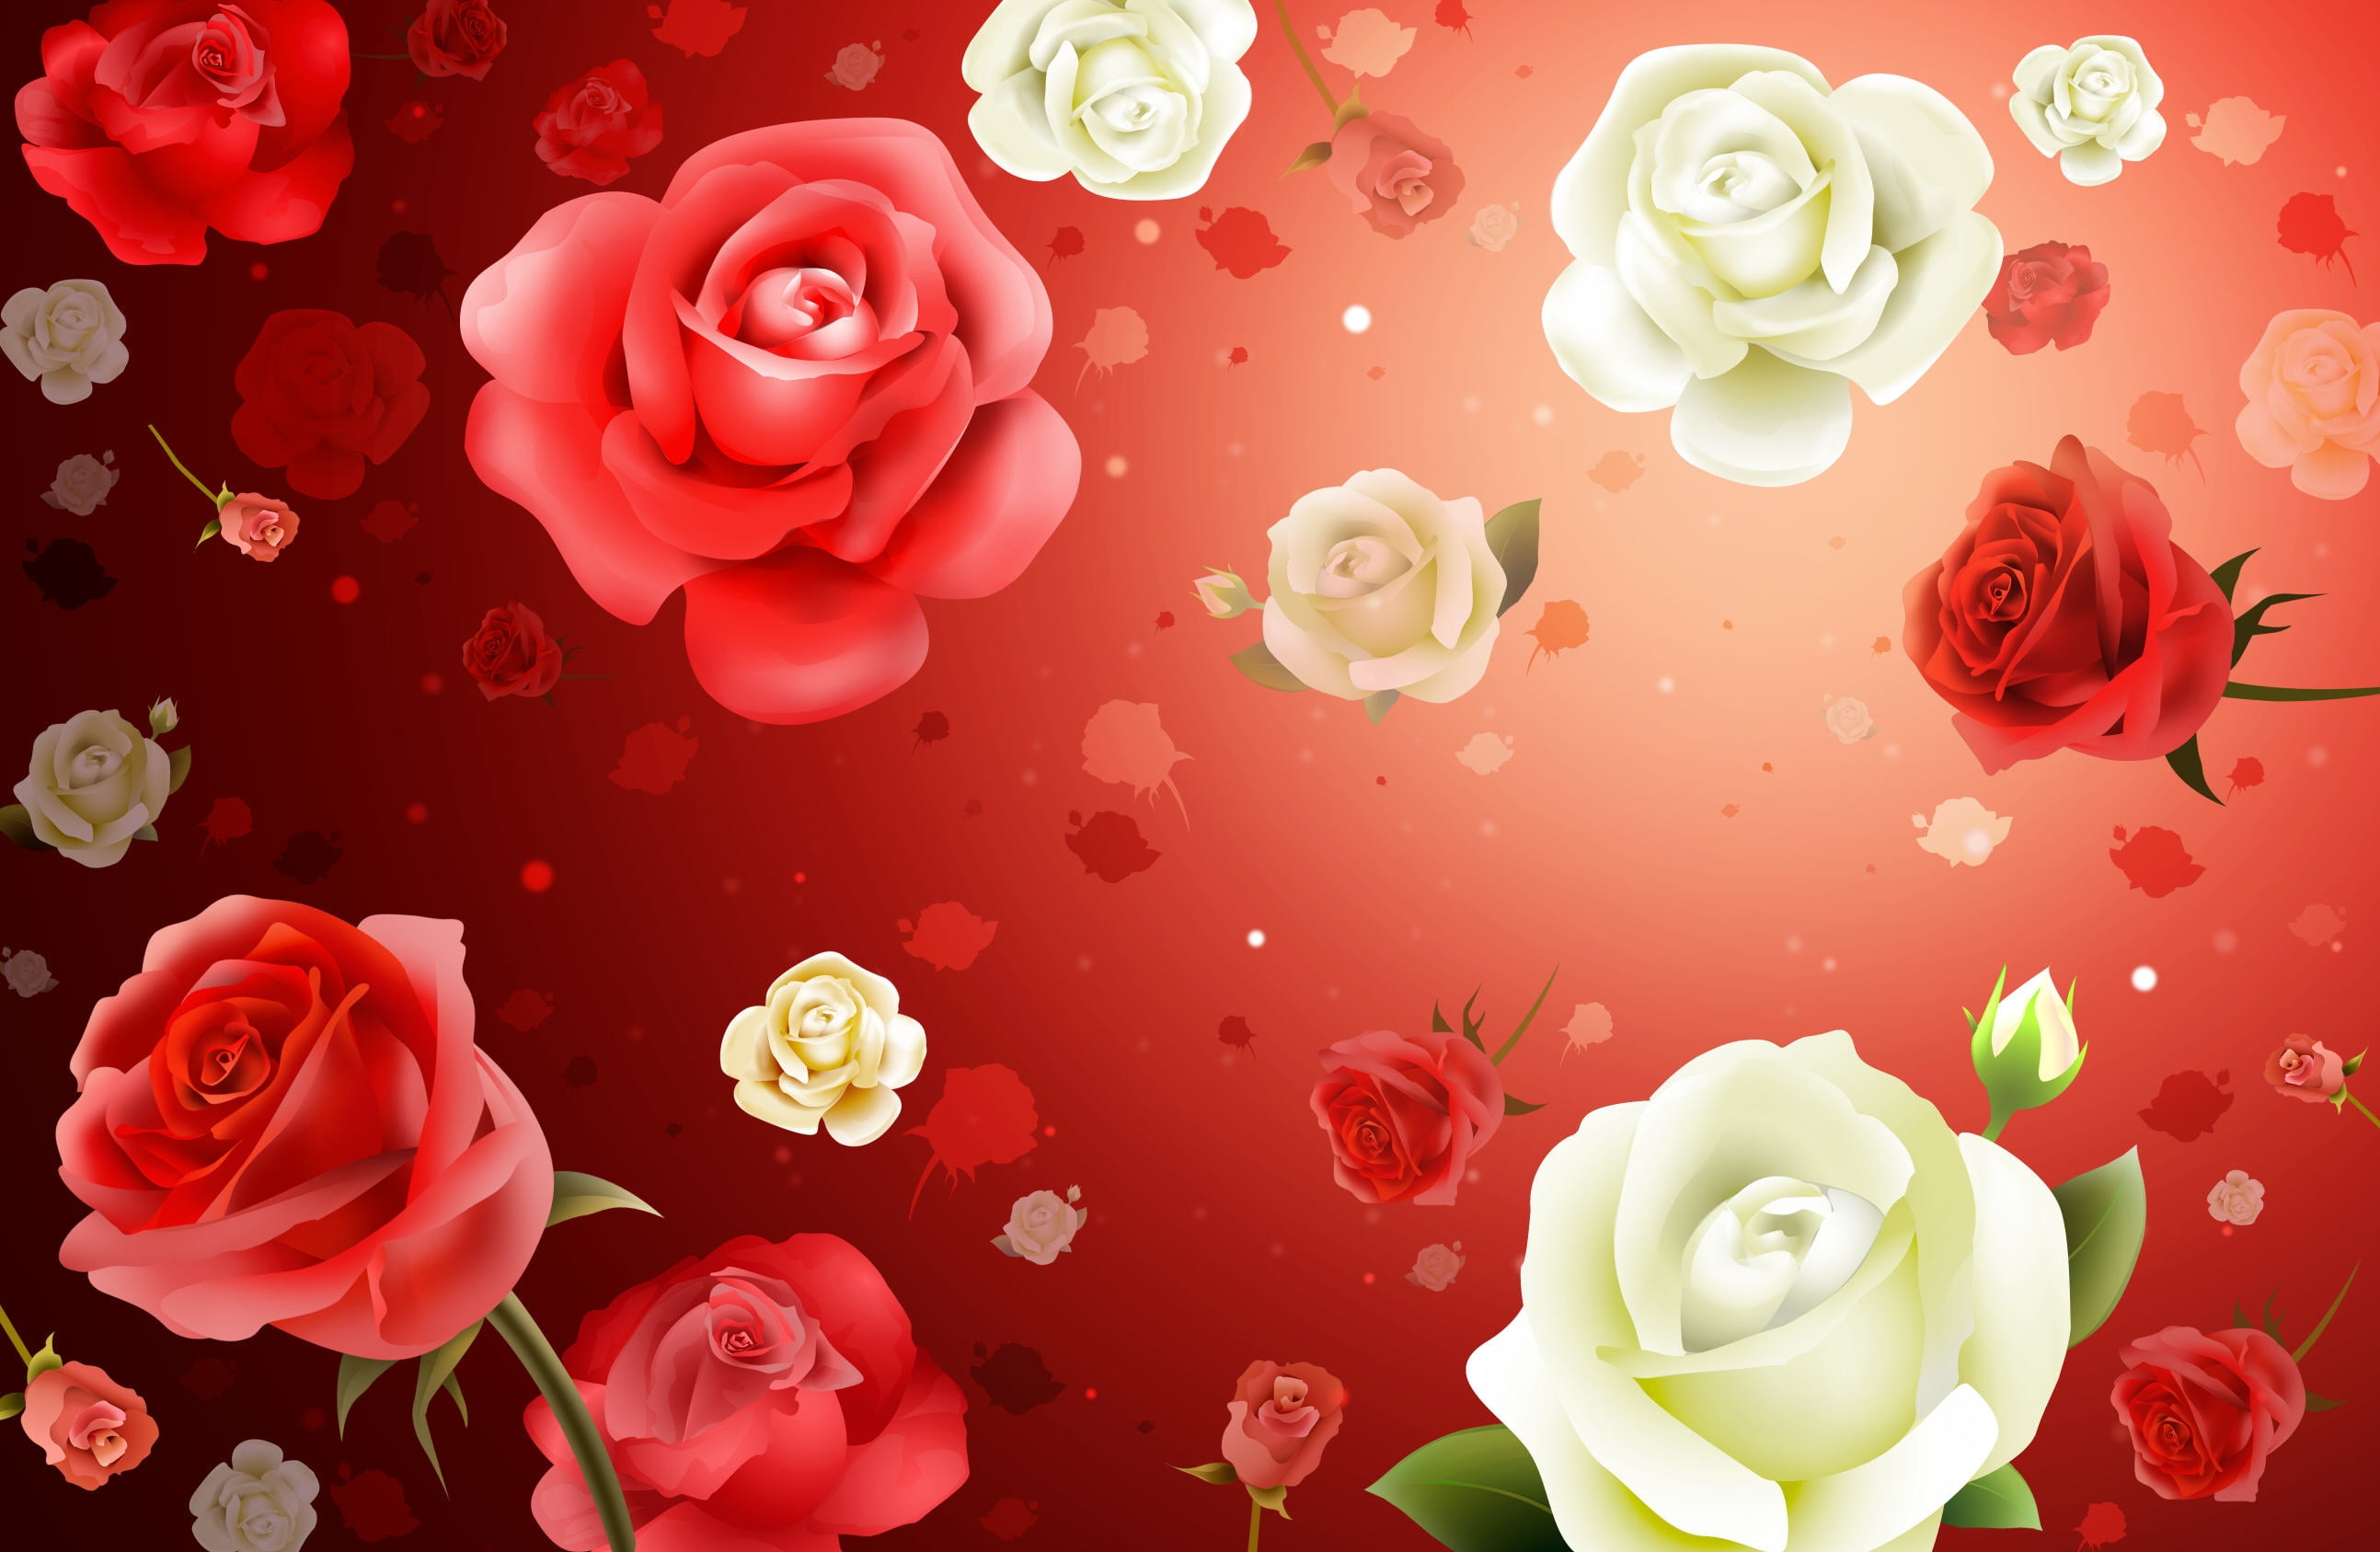 red and white roses illustration